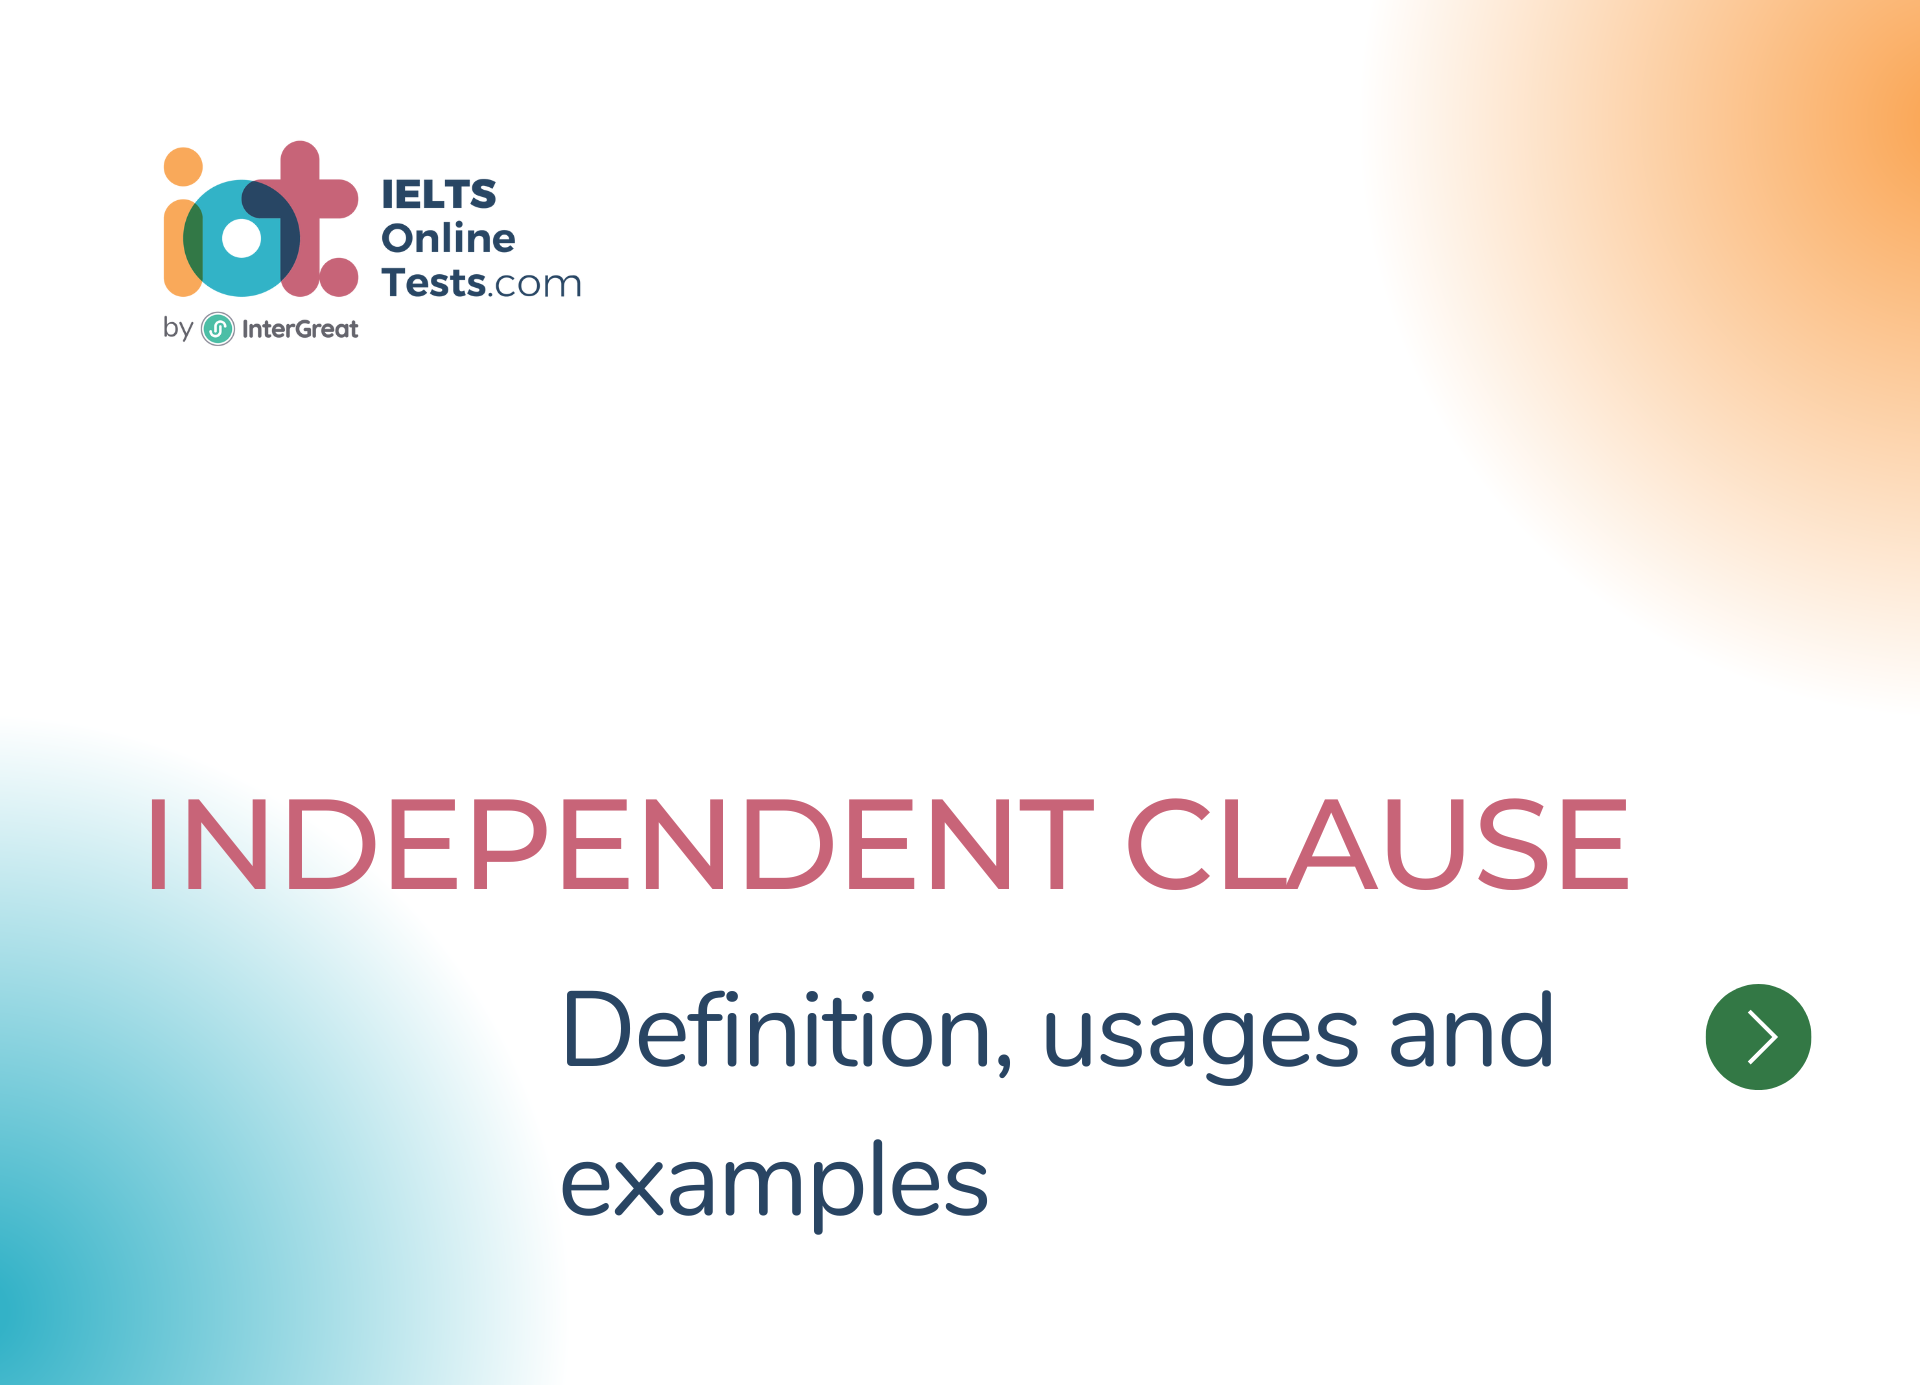 Independent Clause